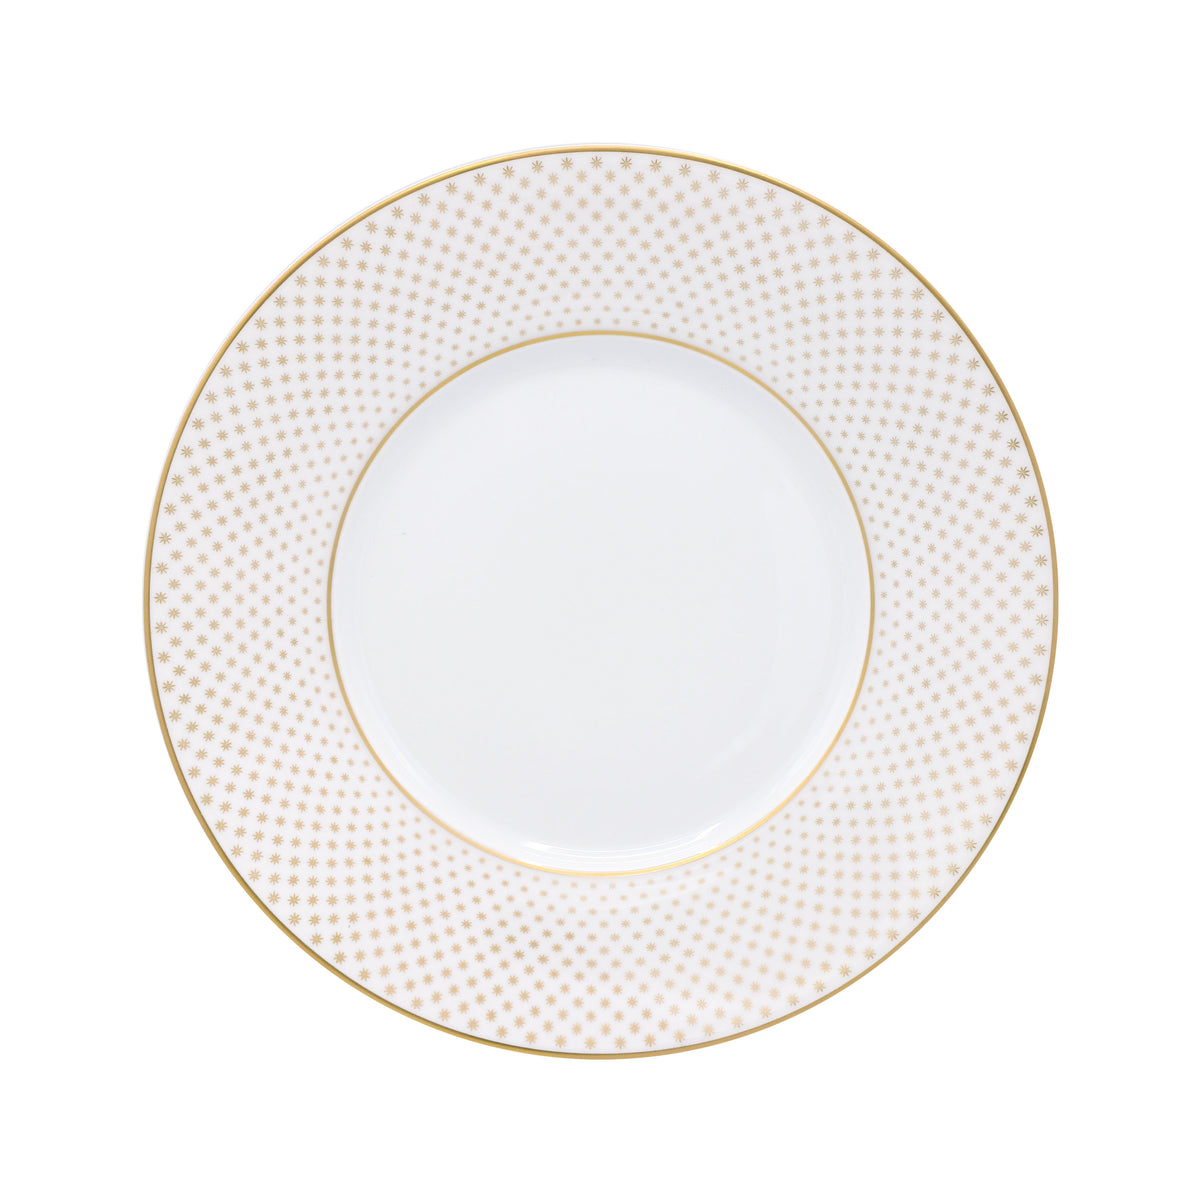 ROSACE Or - Assiette plate